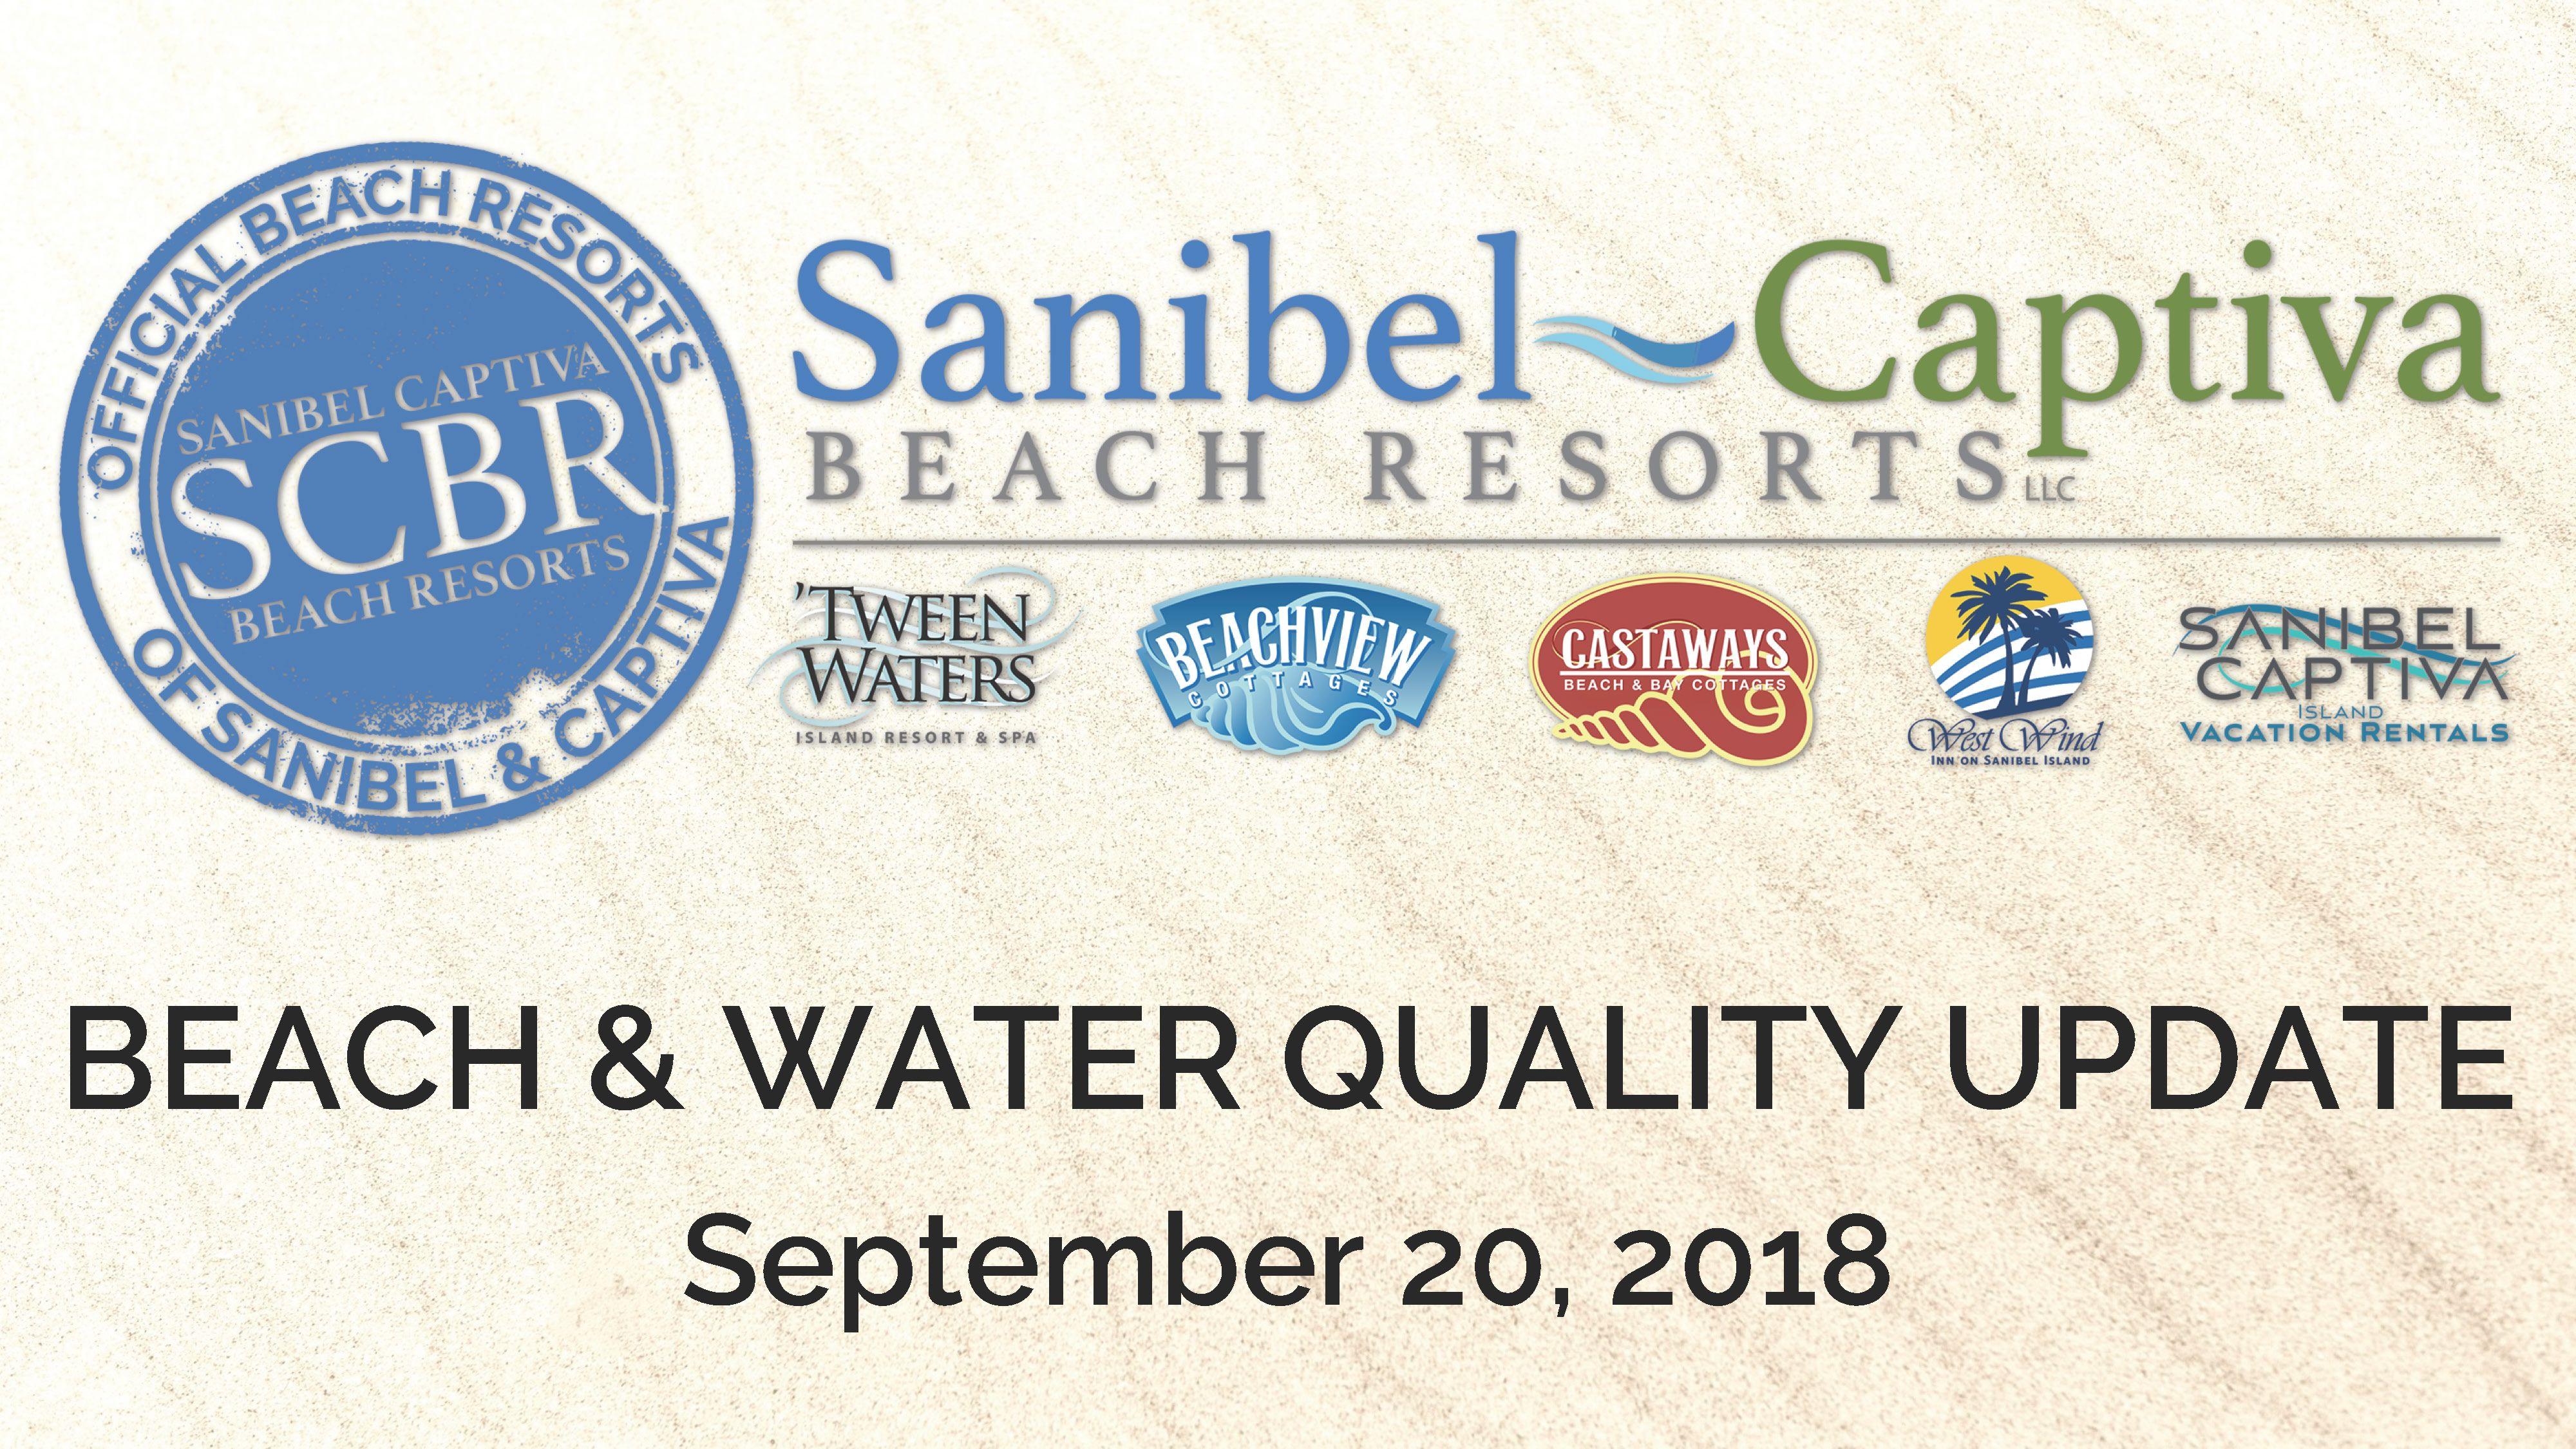 2018 Tide Logo - Beach and Water Quality Update: September 2018